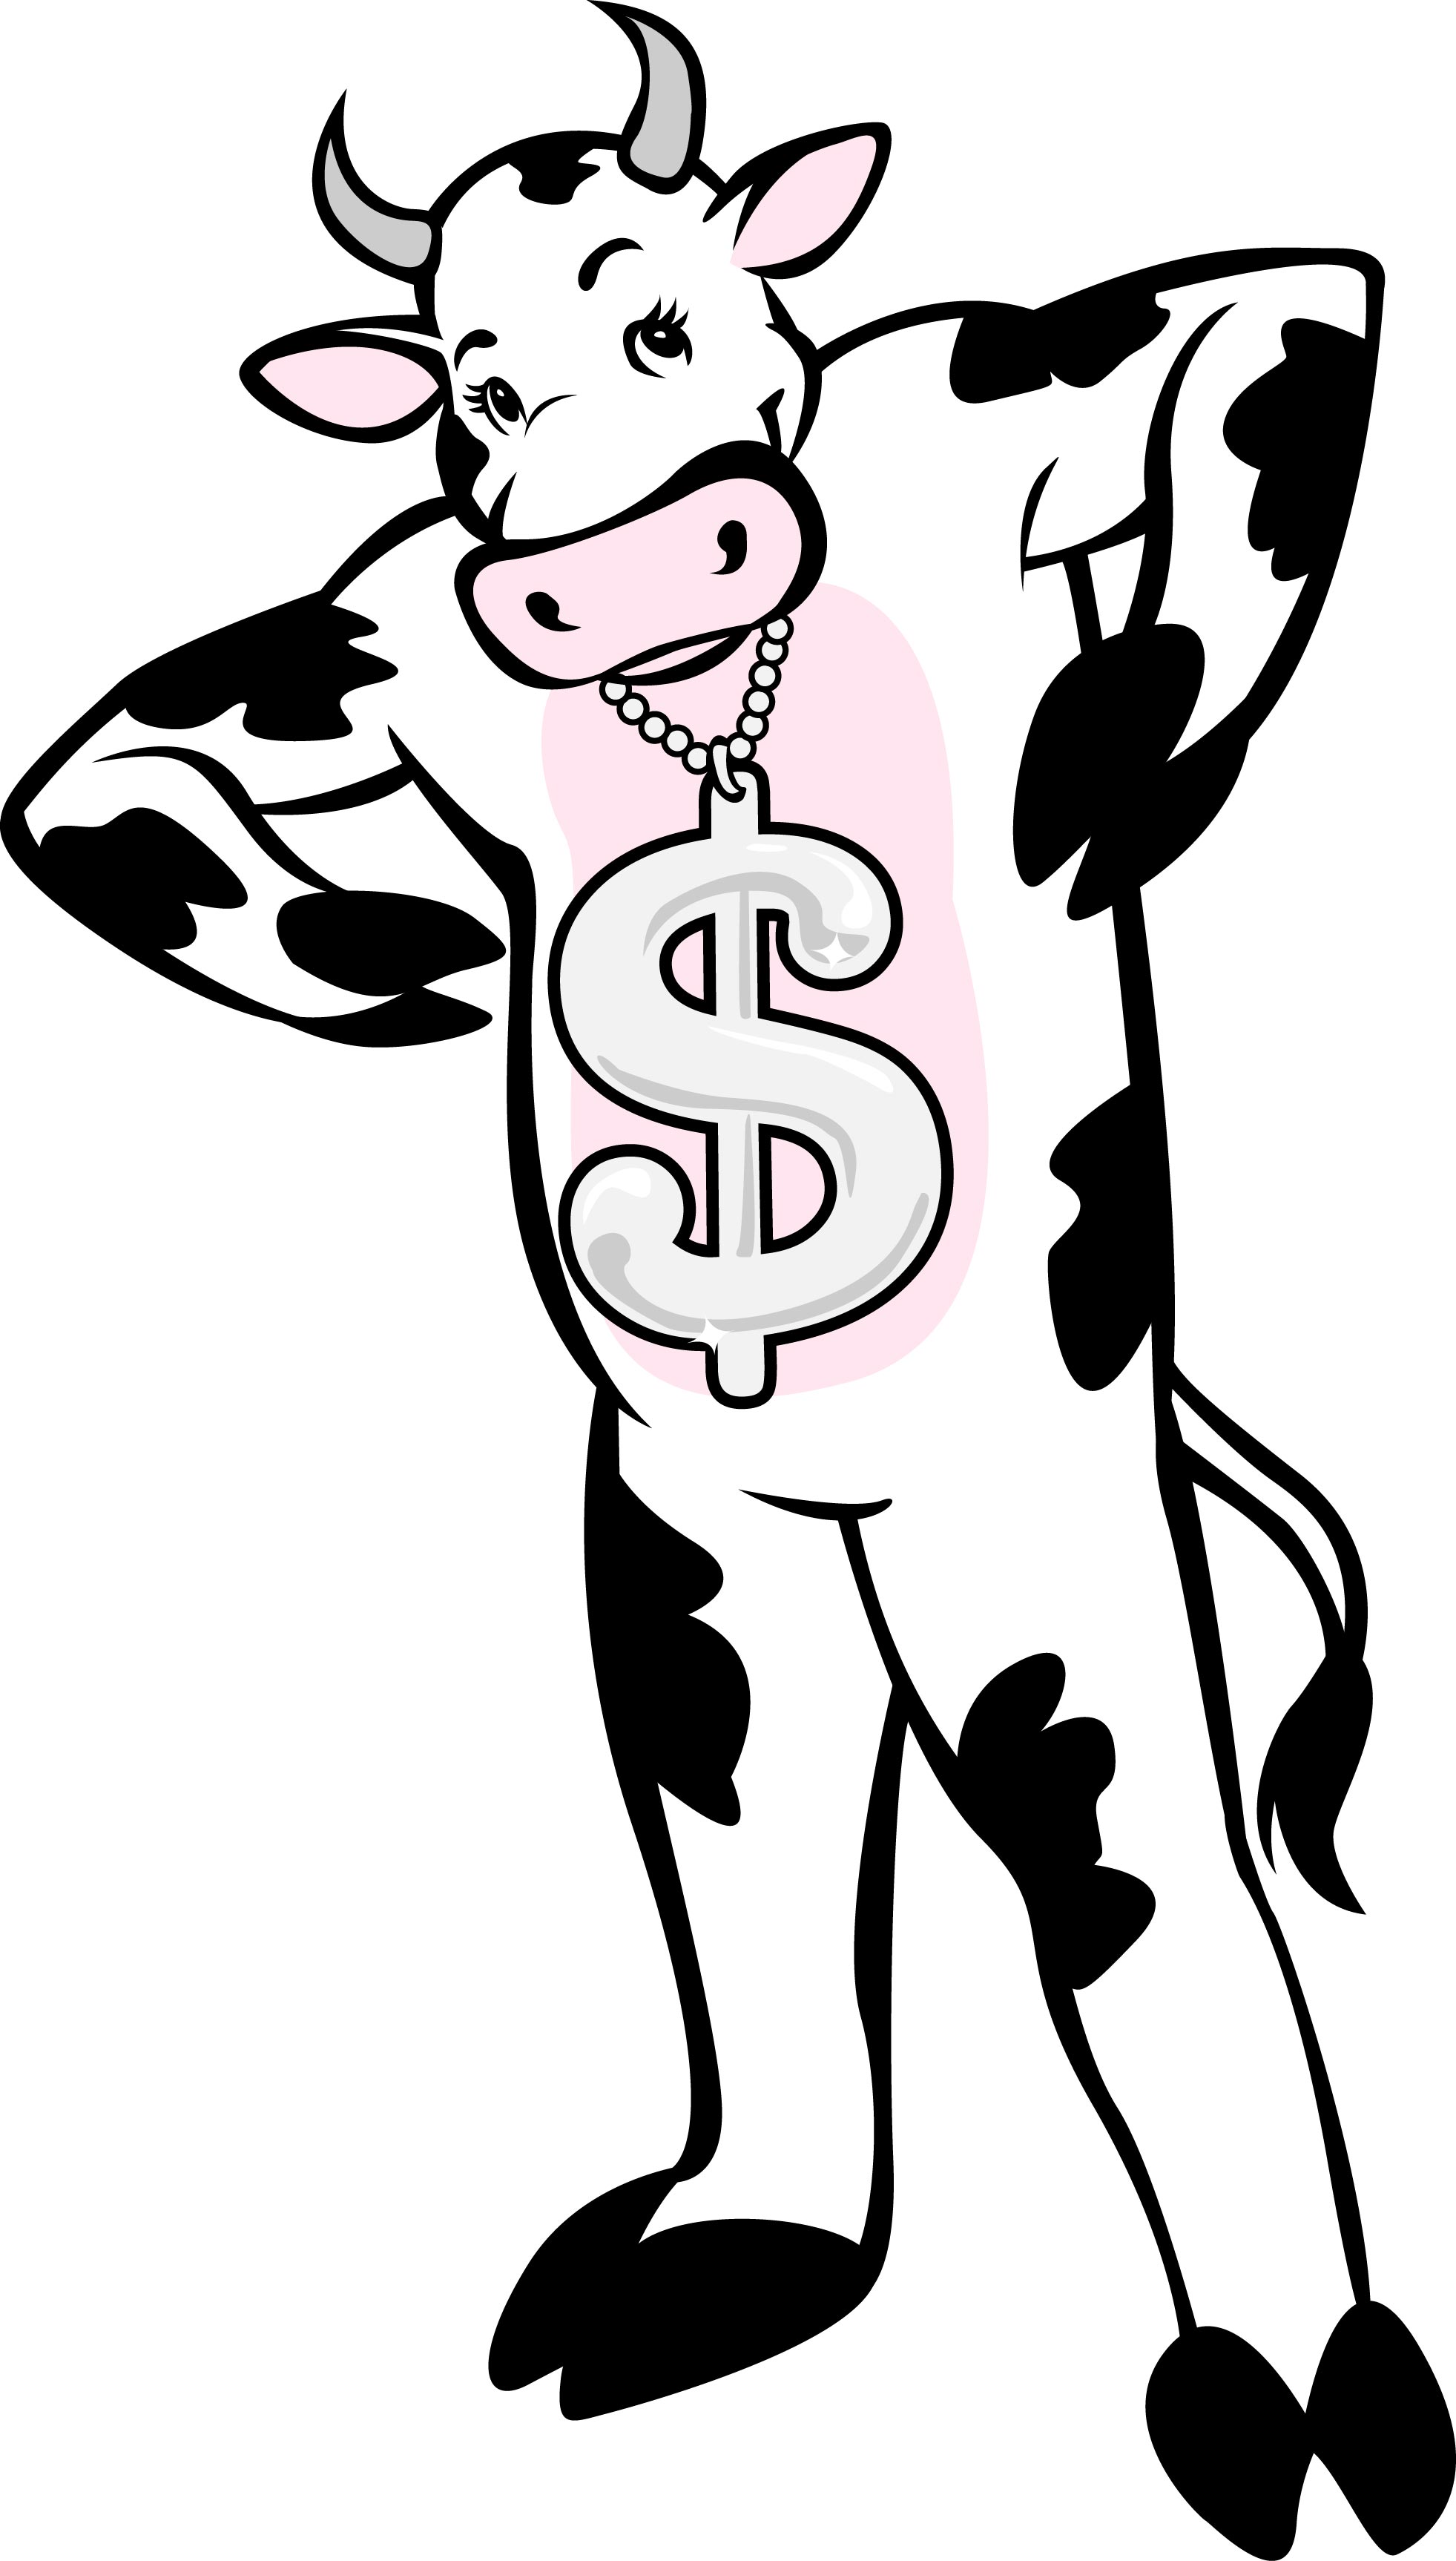 Time for Free College Tuition- Don’t be a Cash Cow